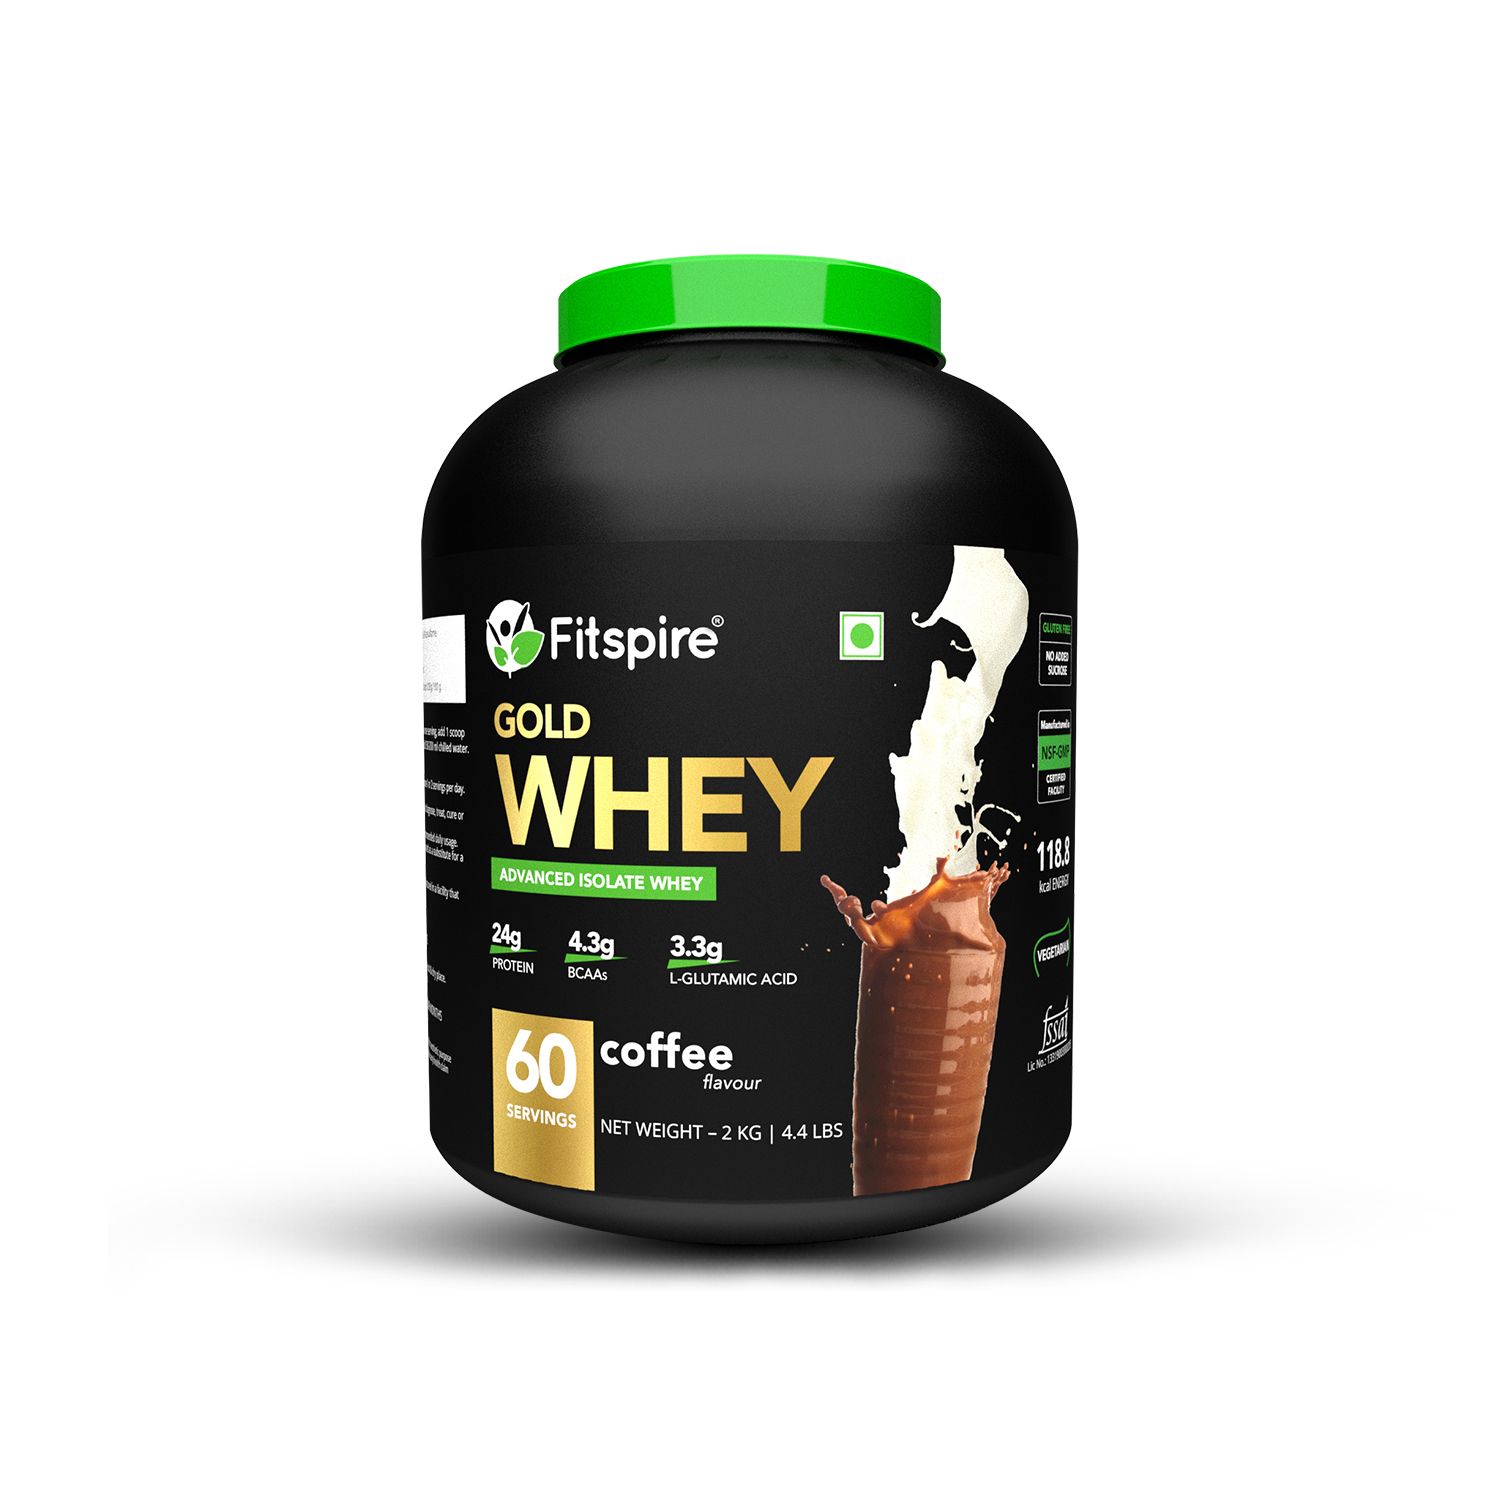 Fitspire 100% Gold Advanced Isolate Whey Protein - Coffee, 2 kg/4.4 lb | 33 gm Serving Size | 24 gm Protein | 4.3 gm BCAA | Gluten & cholesterol Free | Powder Supplement | - 60 Servings